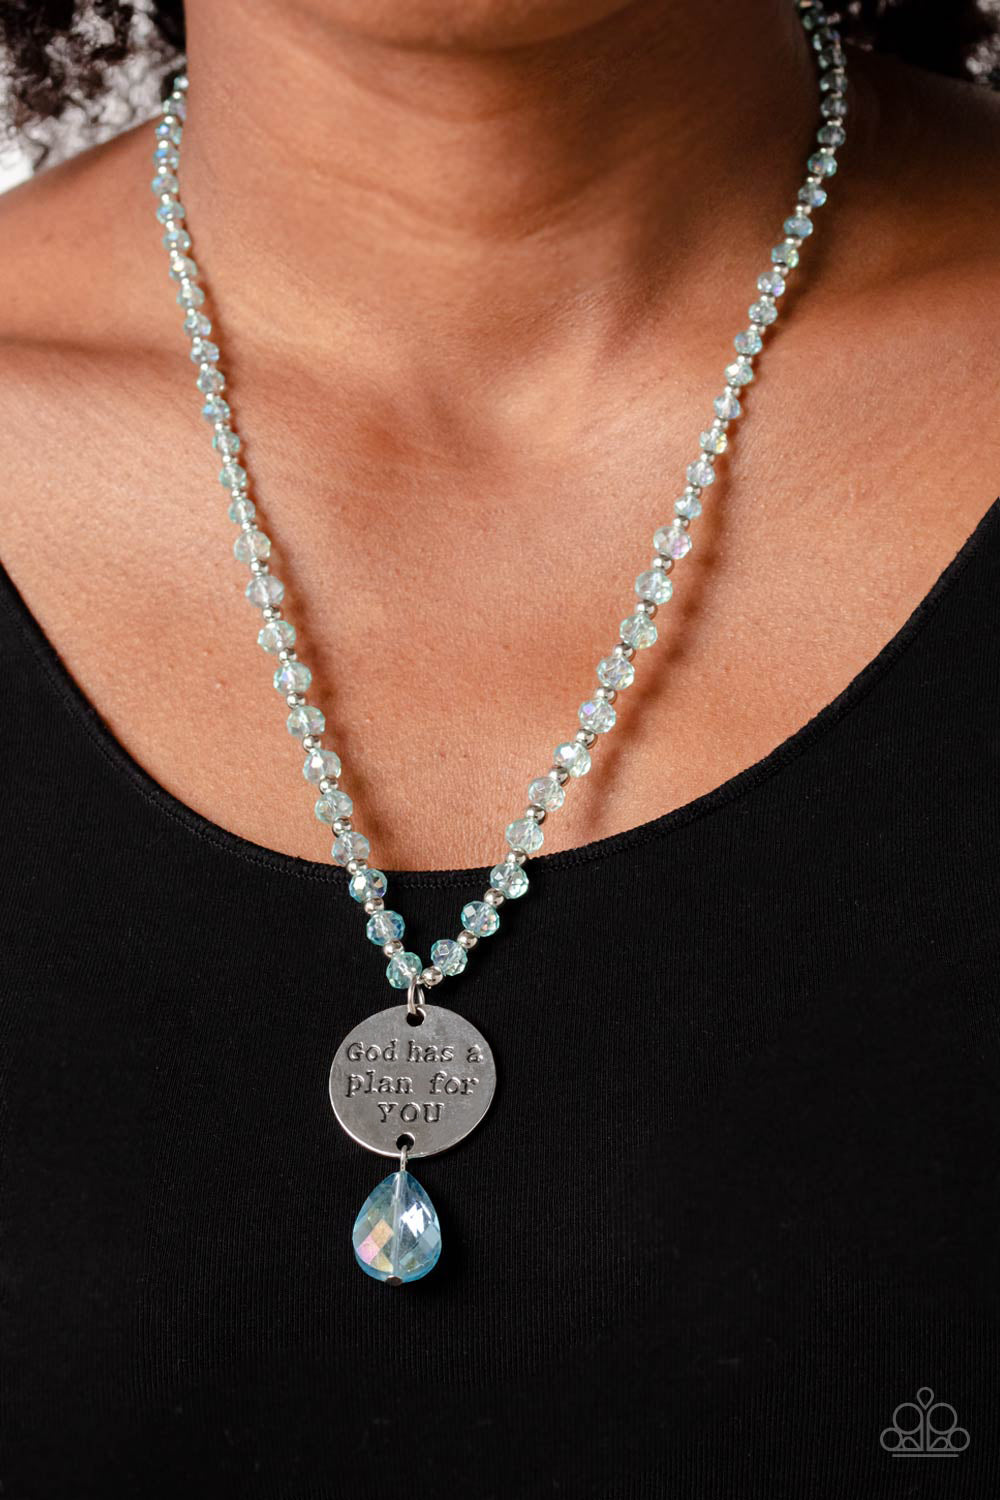 Priceless Plan Blue Necklace - Paparazzi Accessories  Infused along an invisible wire, silver studs and reflective light blue, faceted beads glide down the chest in a shimmery style. Hanging from the bottom of the beads and studs, a hammered silver disc is stamped with the phrase "God has a plan for YOU" with a reflective, blue faceted teardrop bead adding additional swing to the divine design. Features an adjustable clasp closure.  Sold as one individual necklace. Includes one pair of matching earrings.